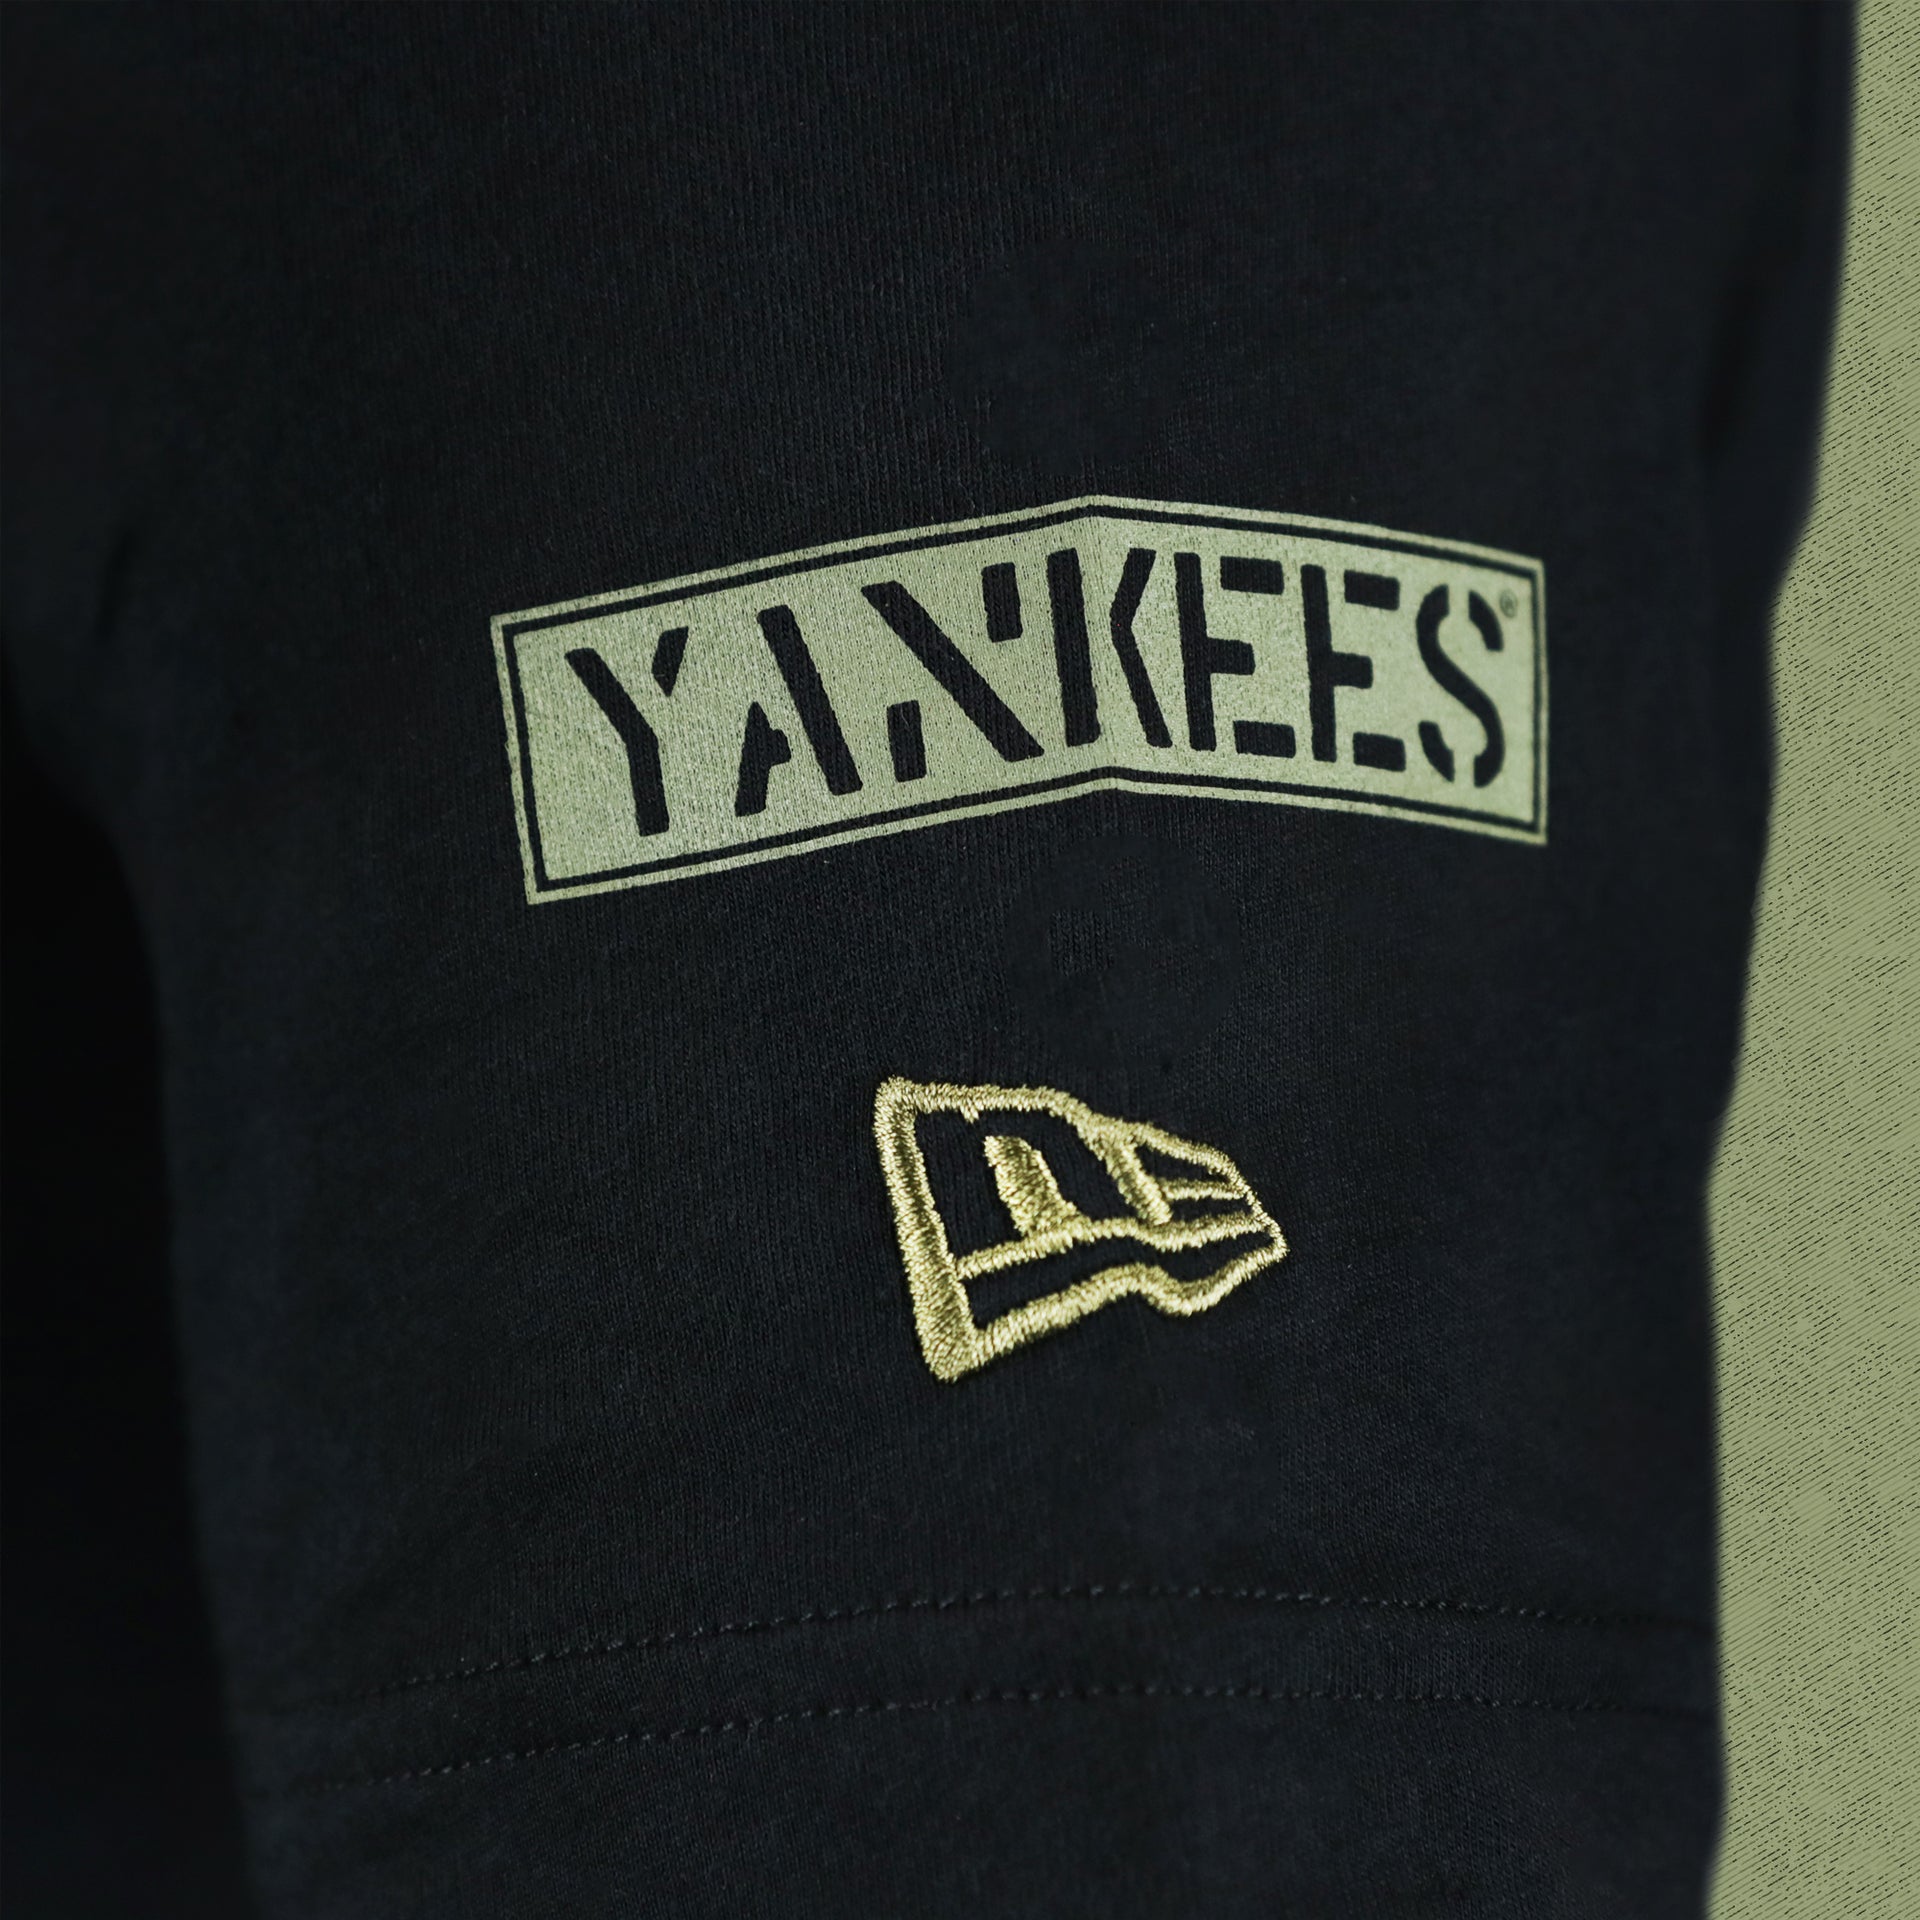 The Yankees Wordmark on the New York Yankees Sports Unite Us Alpha Industries Armed Forces T-Shirt | Black Tshirt